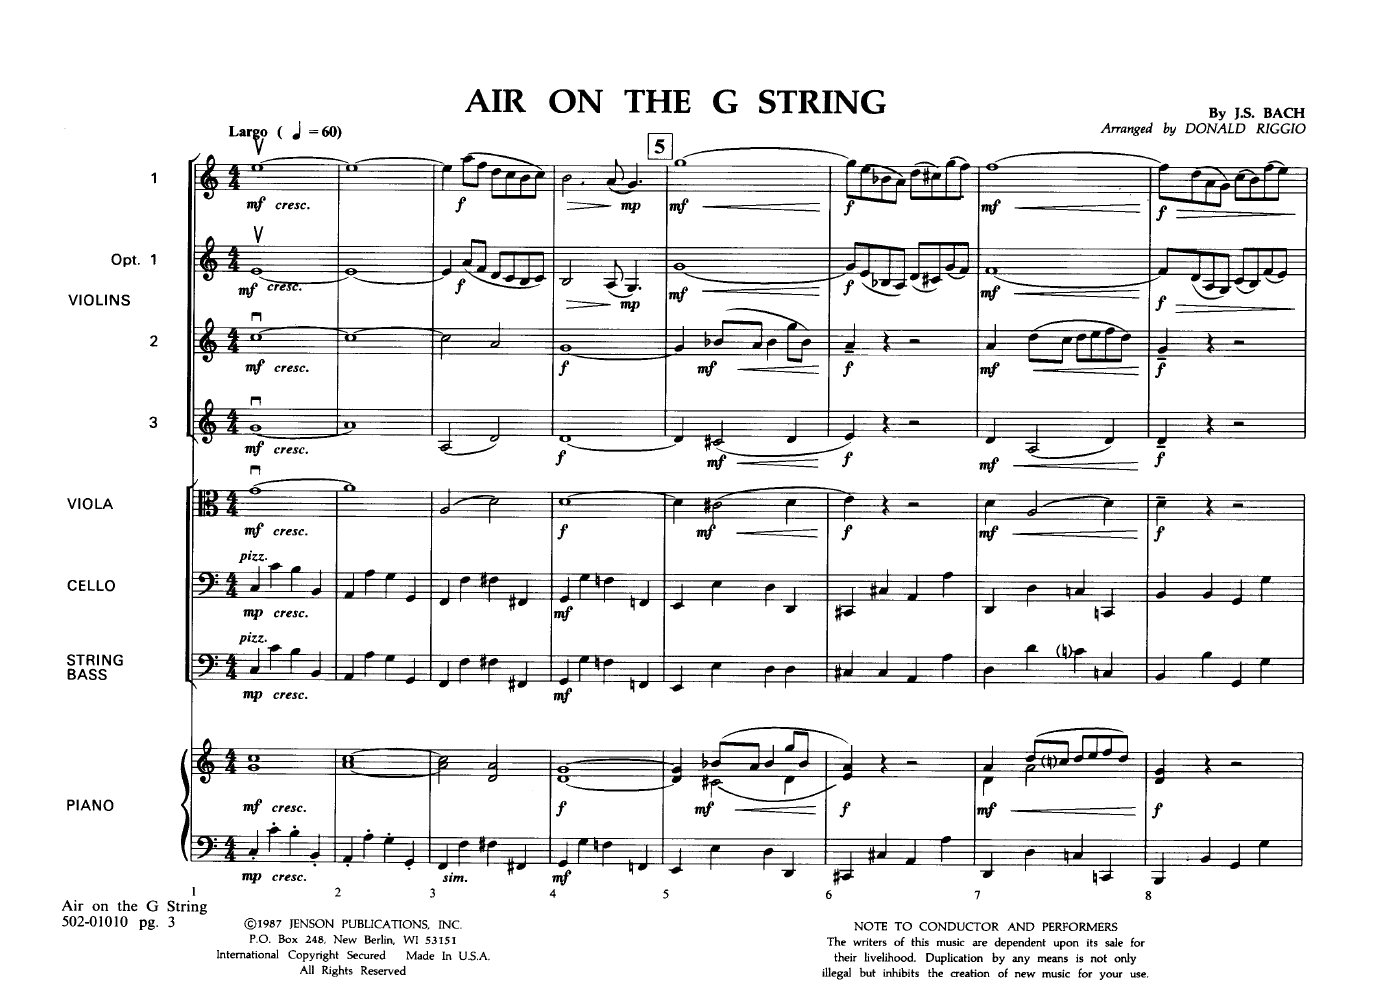 AIR ON THE G STRING